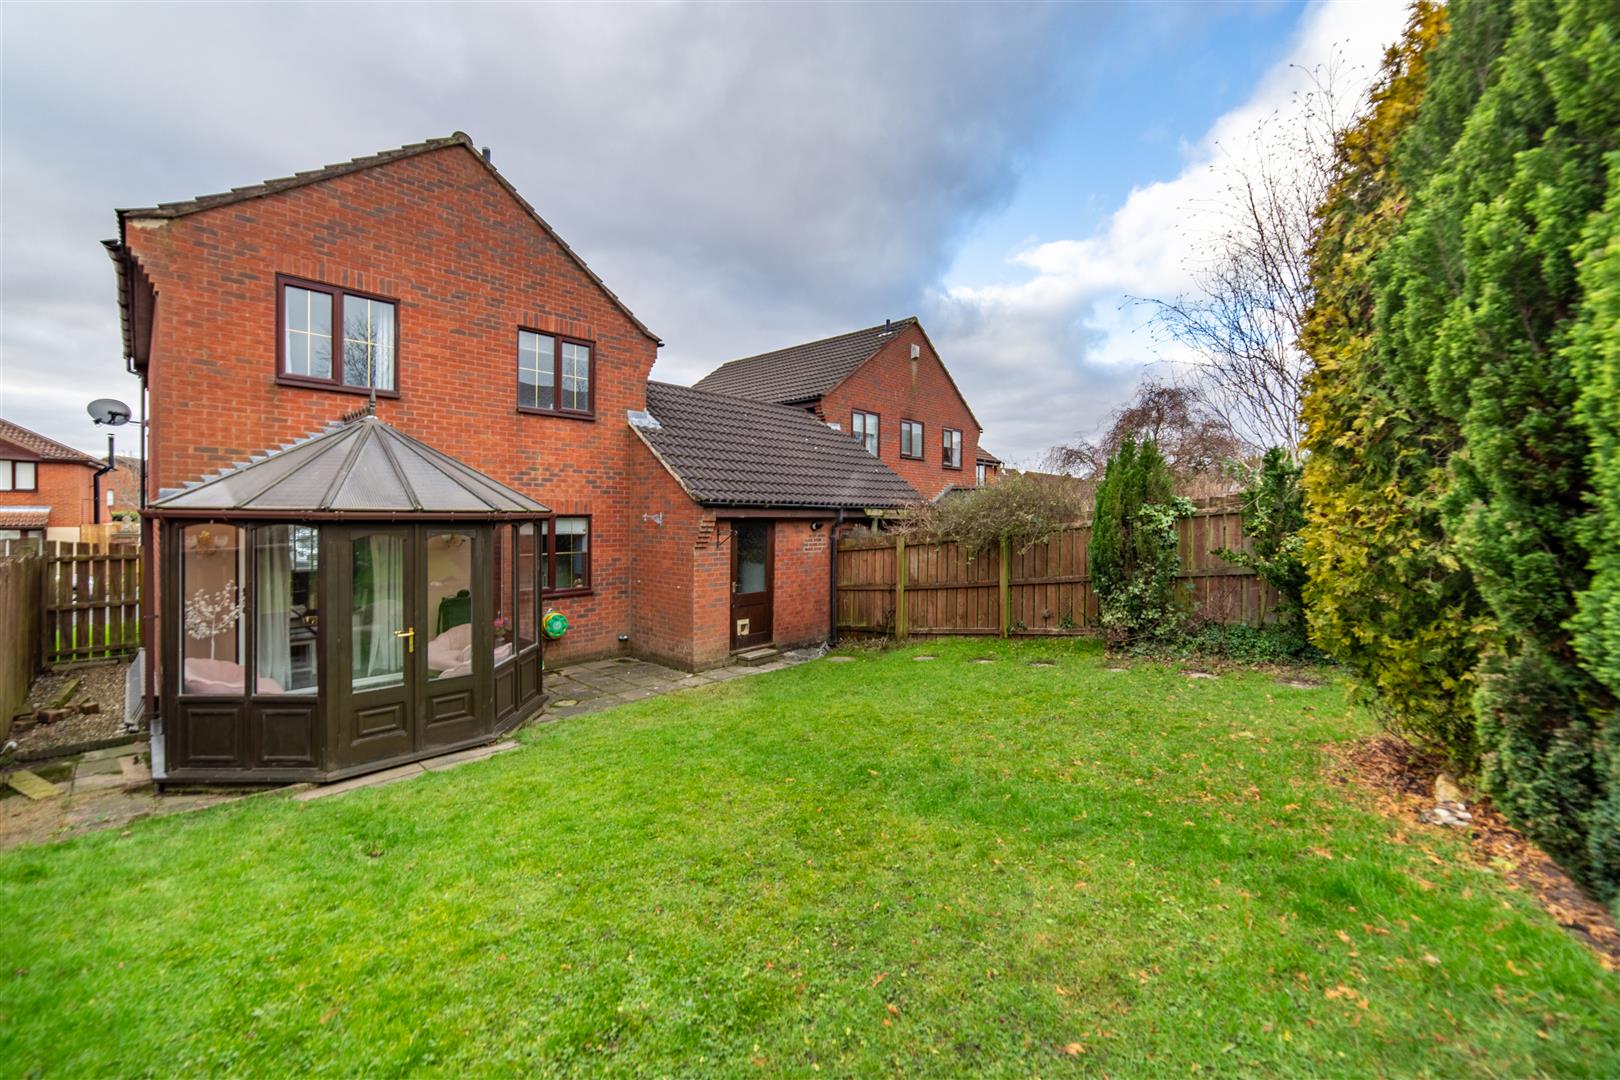 3 bed link detached house for sale in West Wynd, Killingworth 19